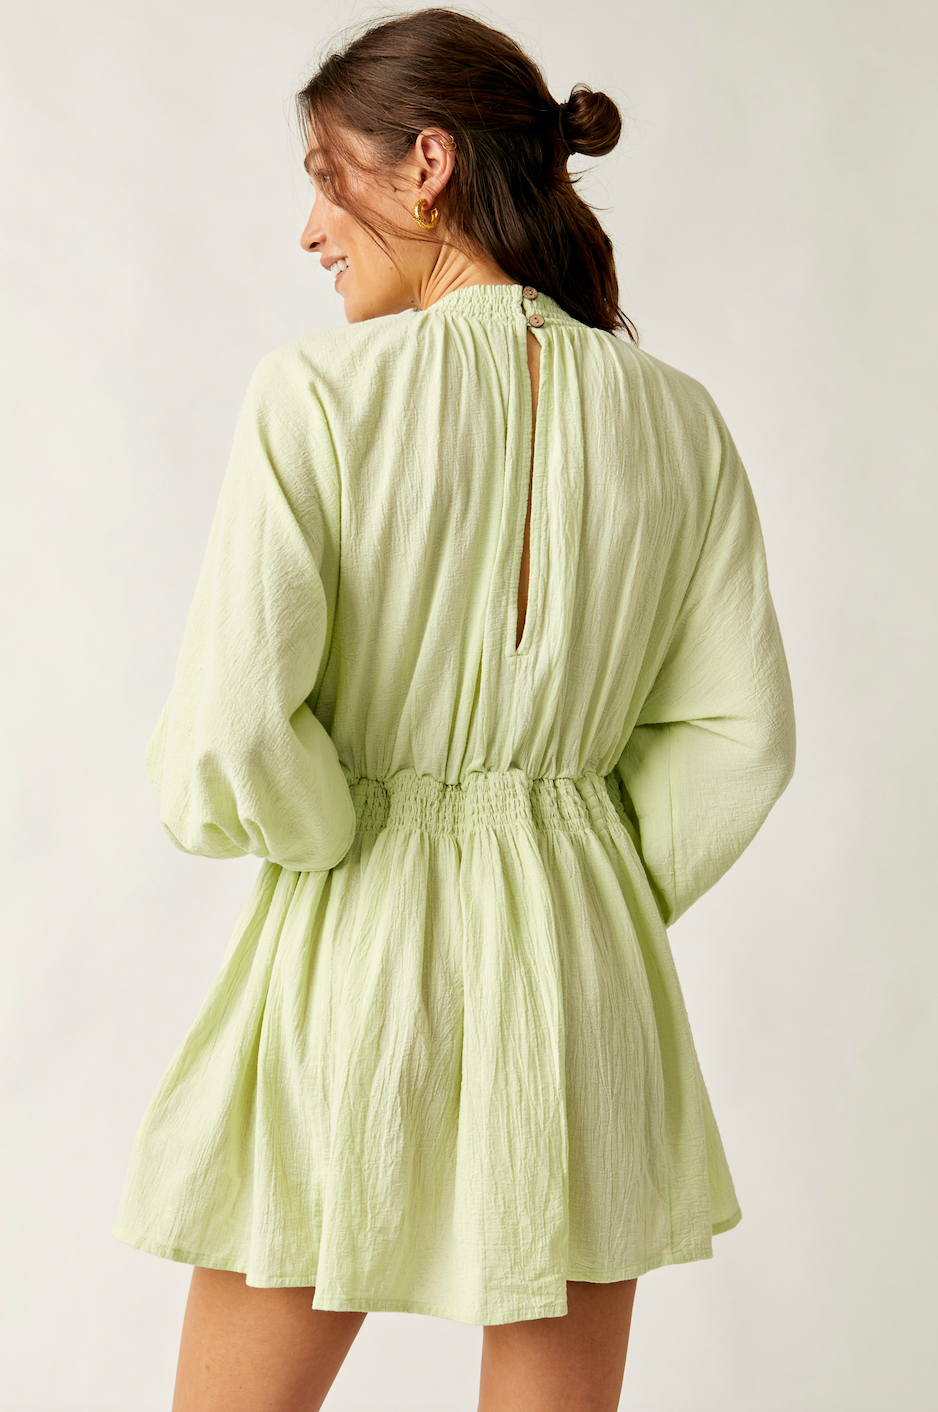 FREE PEOPLE FOR THE MOMENT MINI DRESS IN LIME SORBETTO